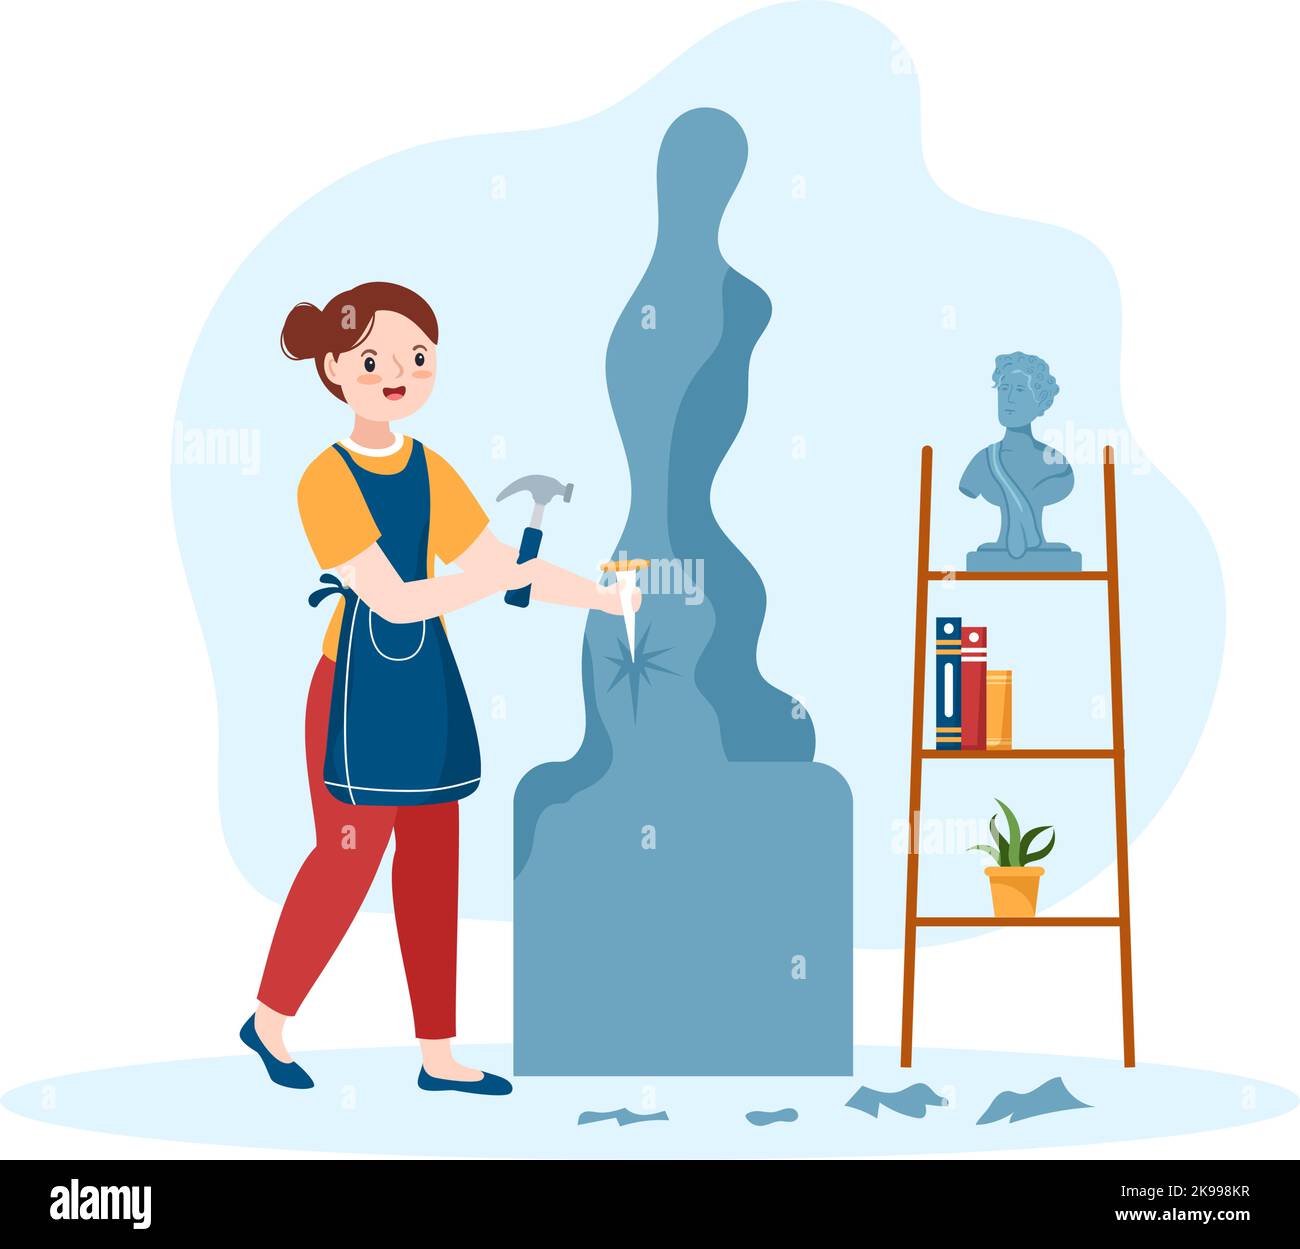 a Sculptor is Carving Sculpture to Form a Work and Will be on Display in the Museum on Flat Cartoon Hand Drawn Templates Illustration Stock Vector